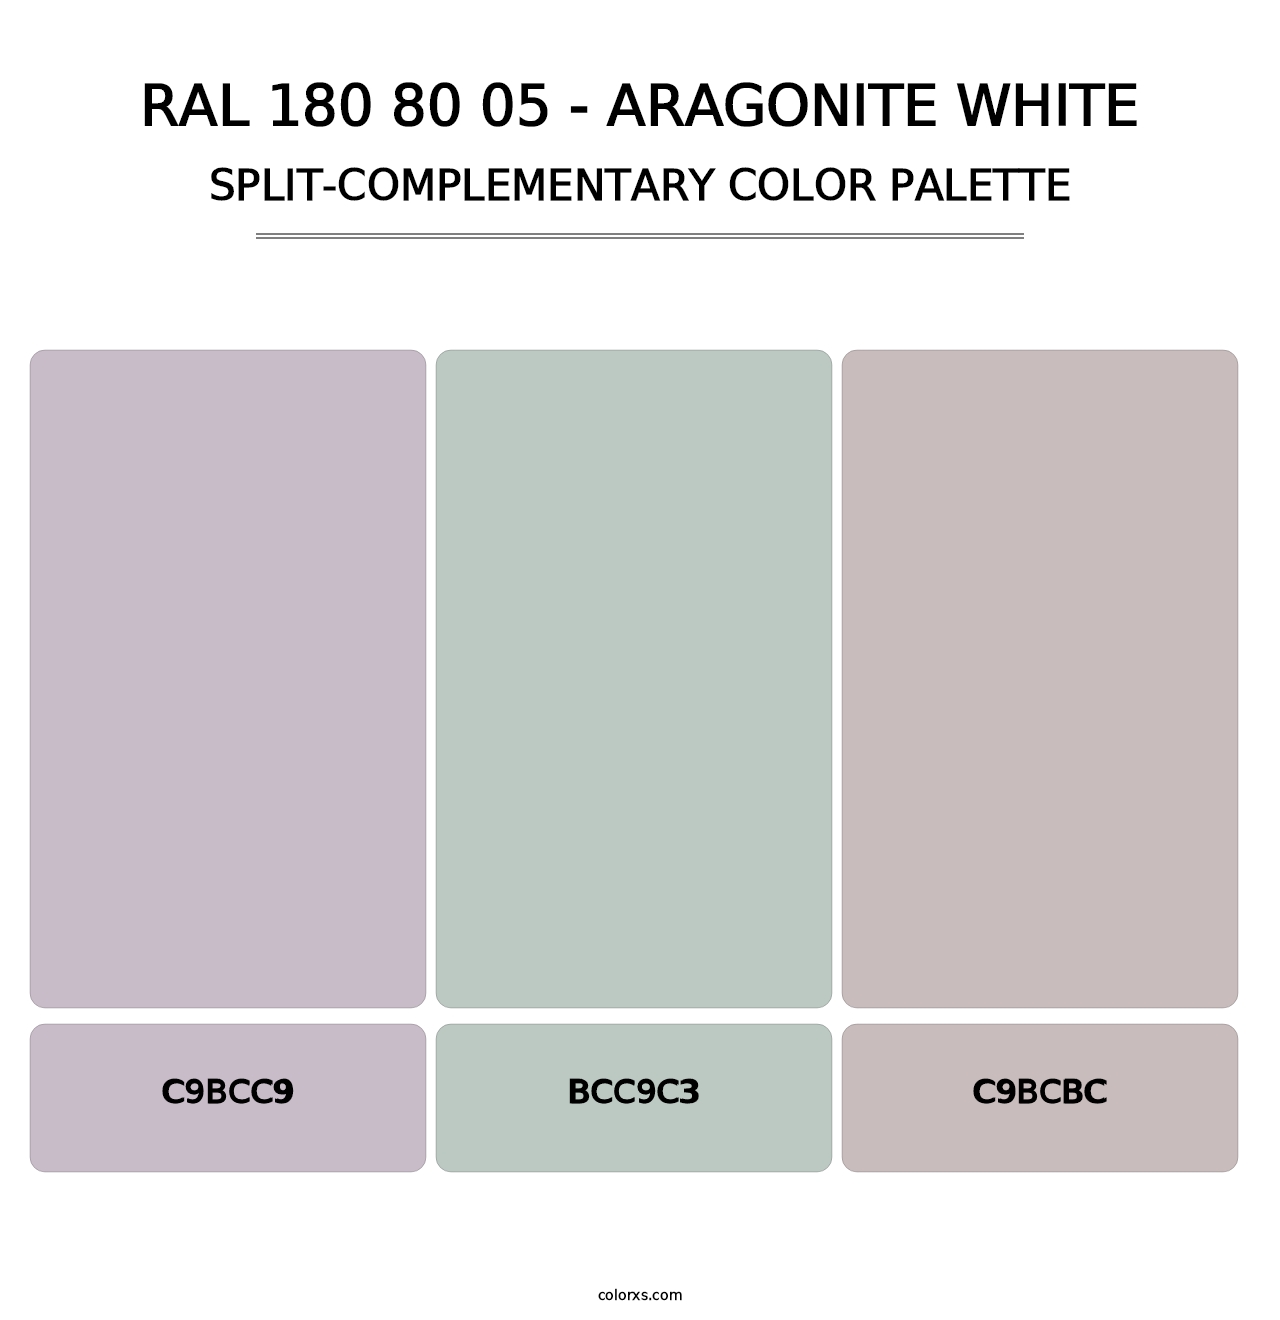 RAL 180 80 05 - Aragonite White - Split-Complementary Color Palette